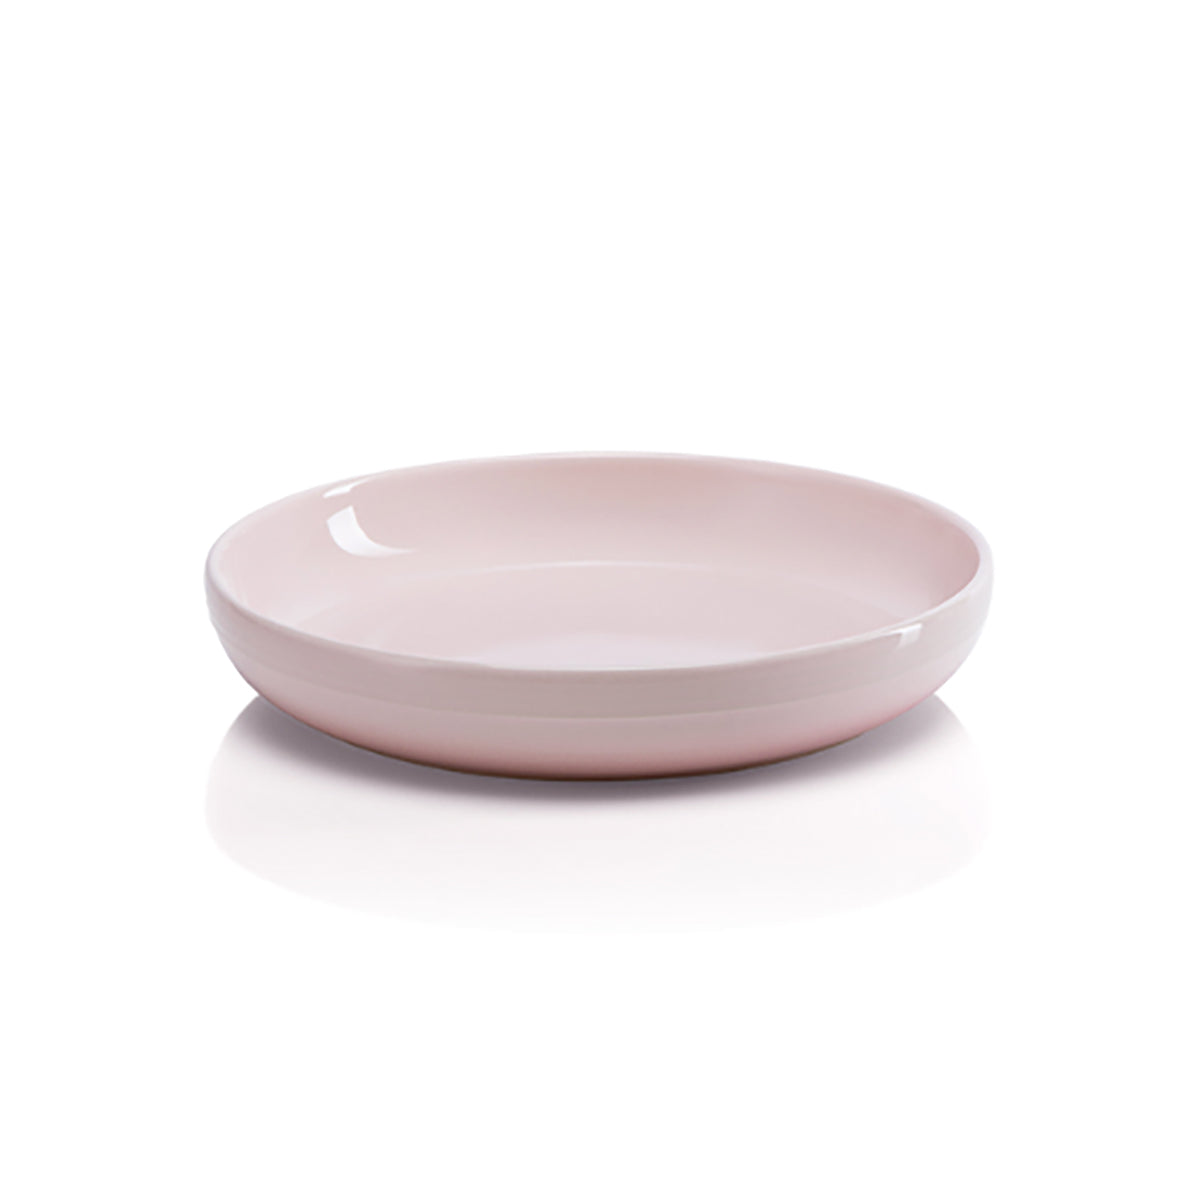 Coupe Pasta Bowl 22cm Shell Pink